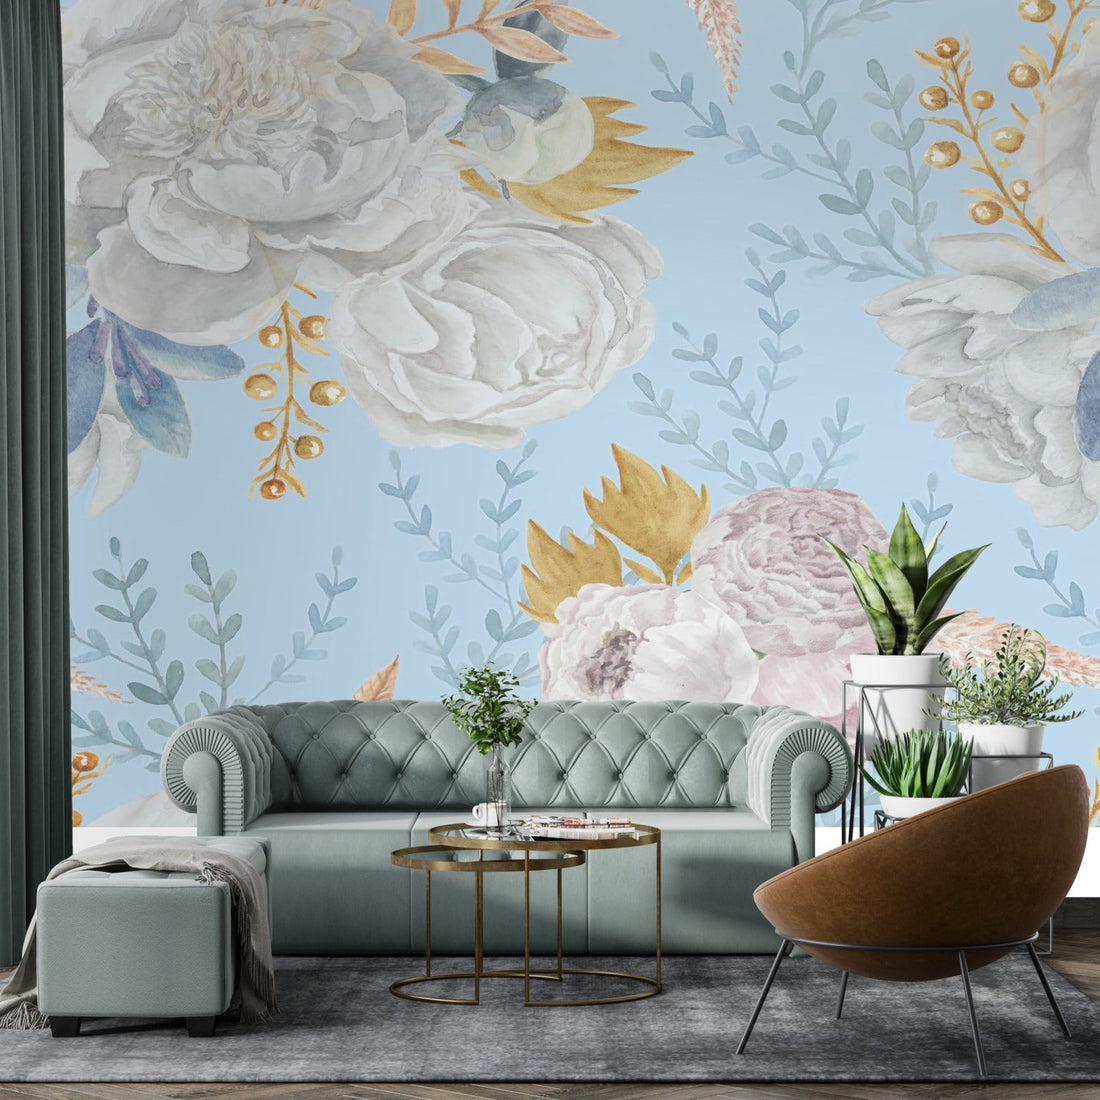 Kate McEnroe New York Pastel Blue And White Peony Floral Wall MuralWall Mural119303